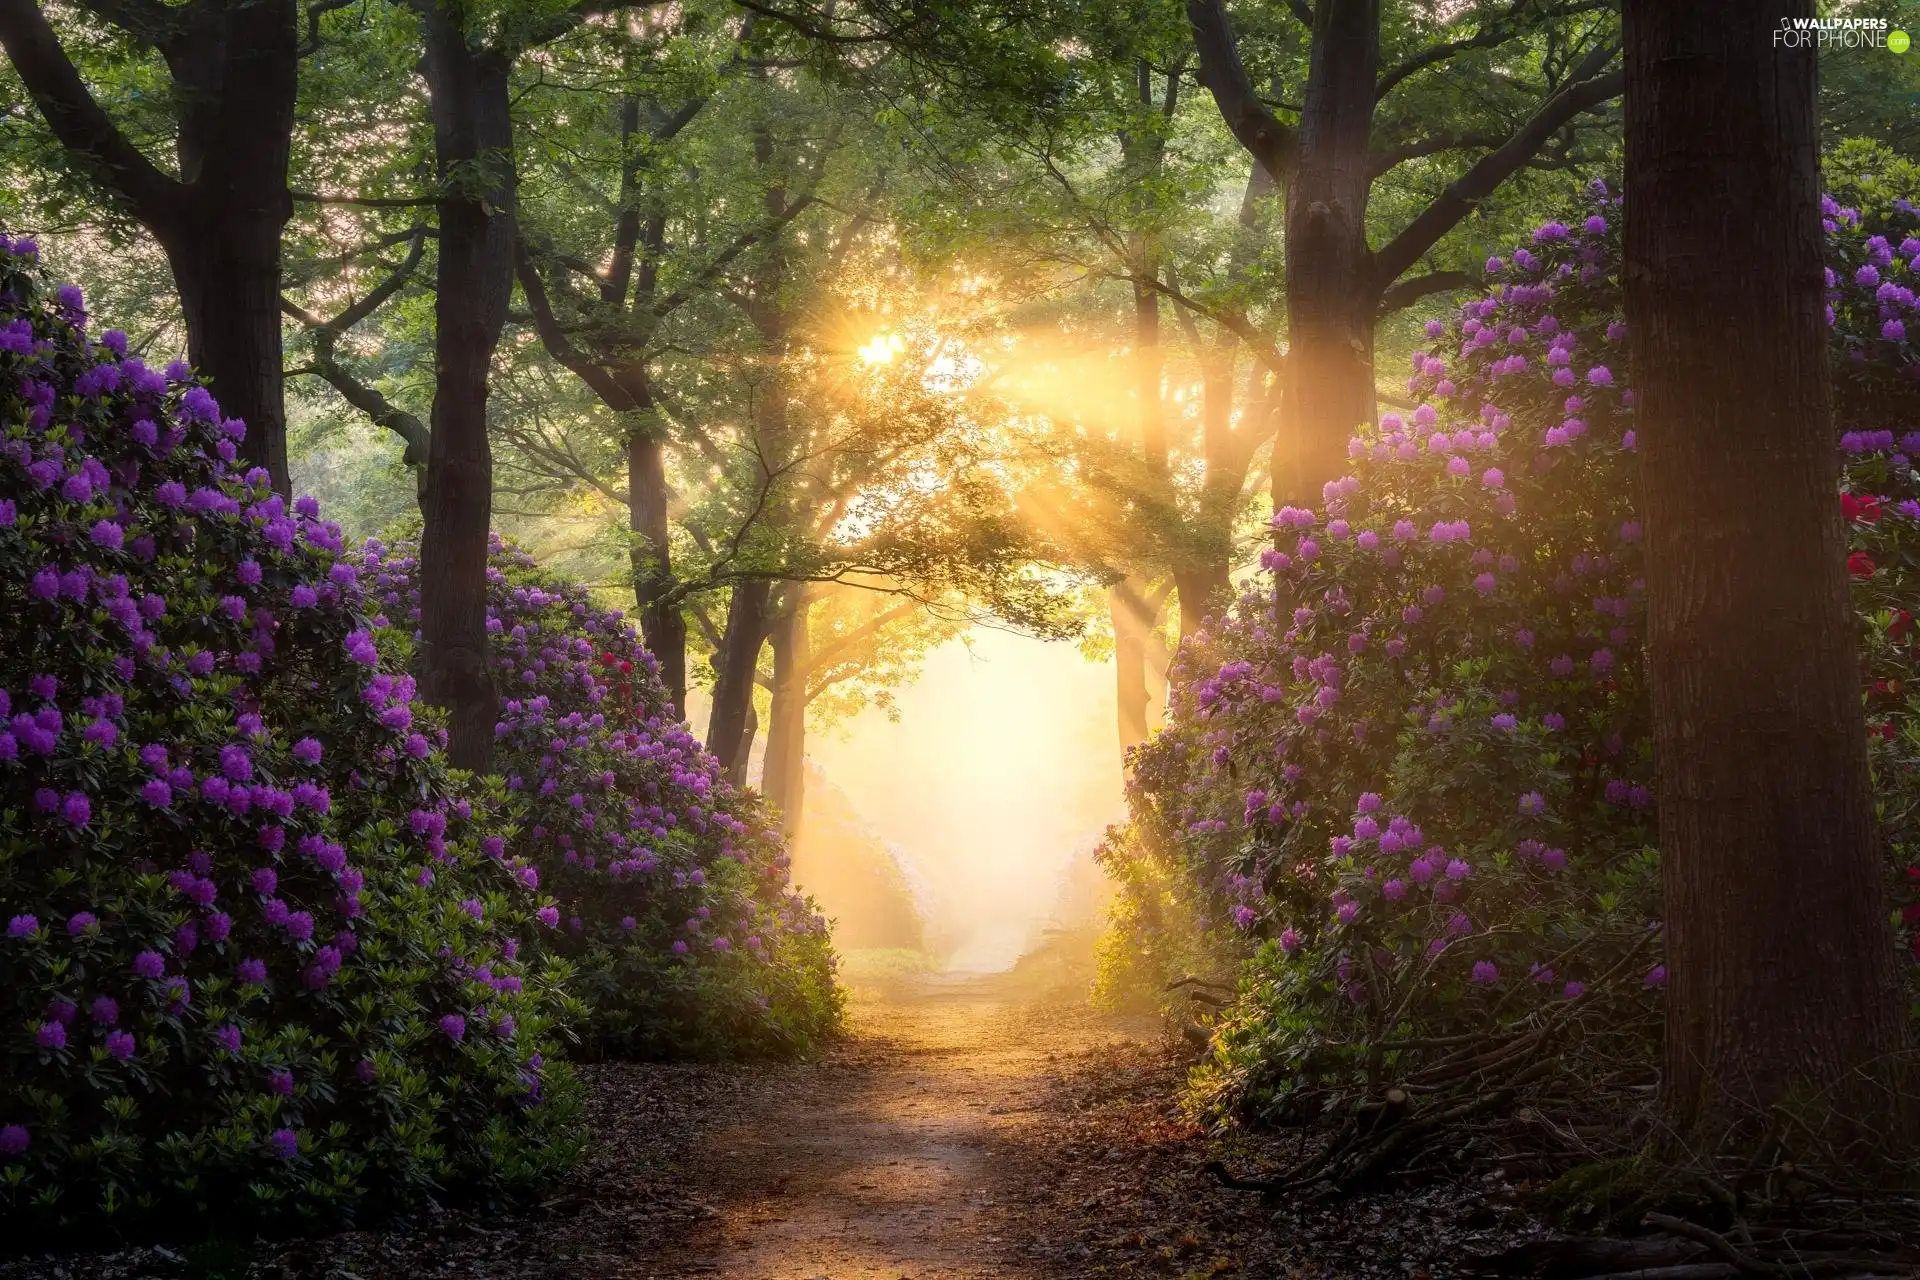 viewes, forest, Path, Rhododendron, light breaking through sky, trees